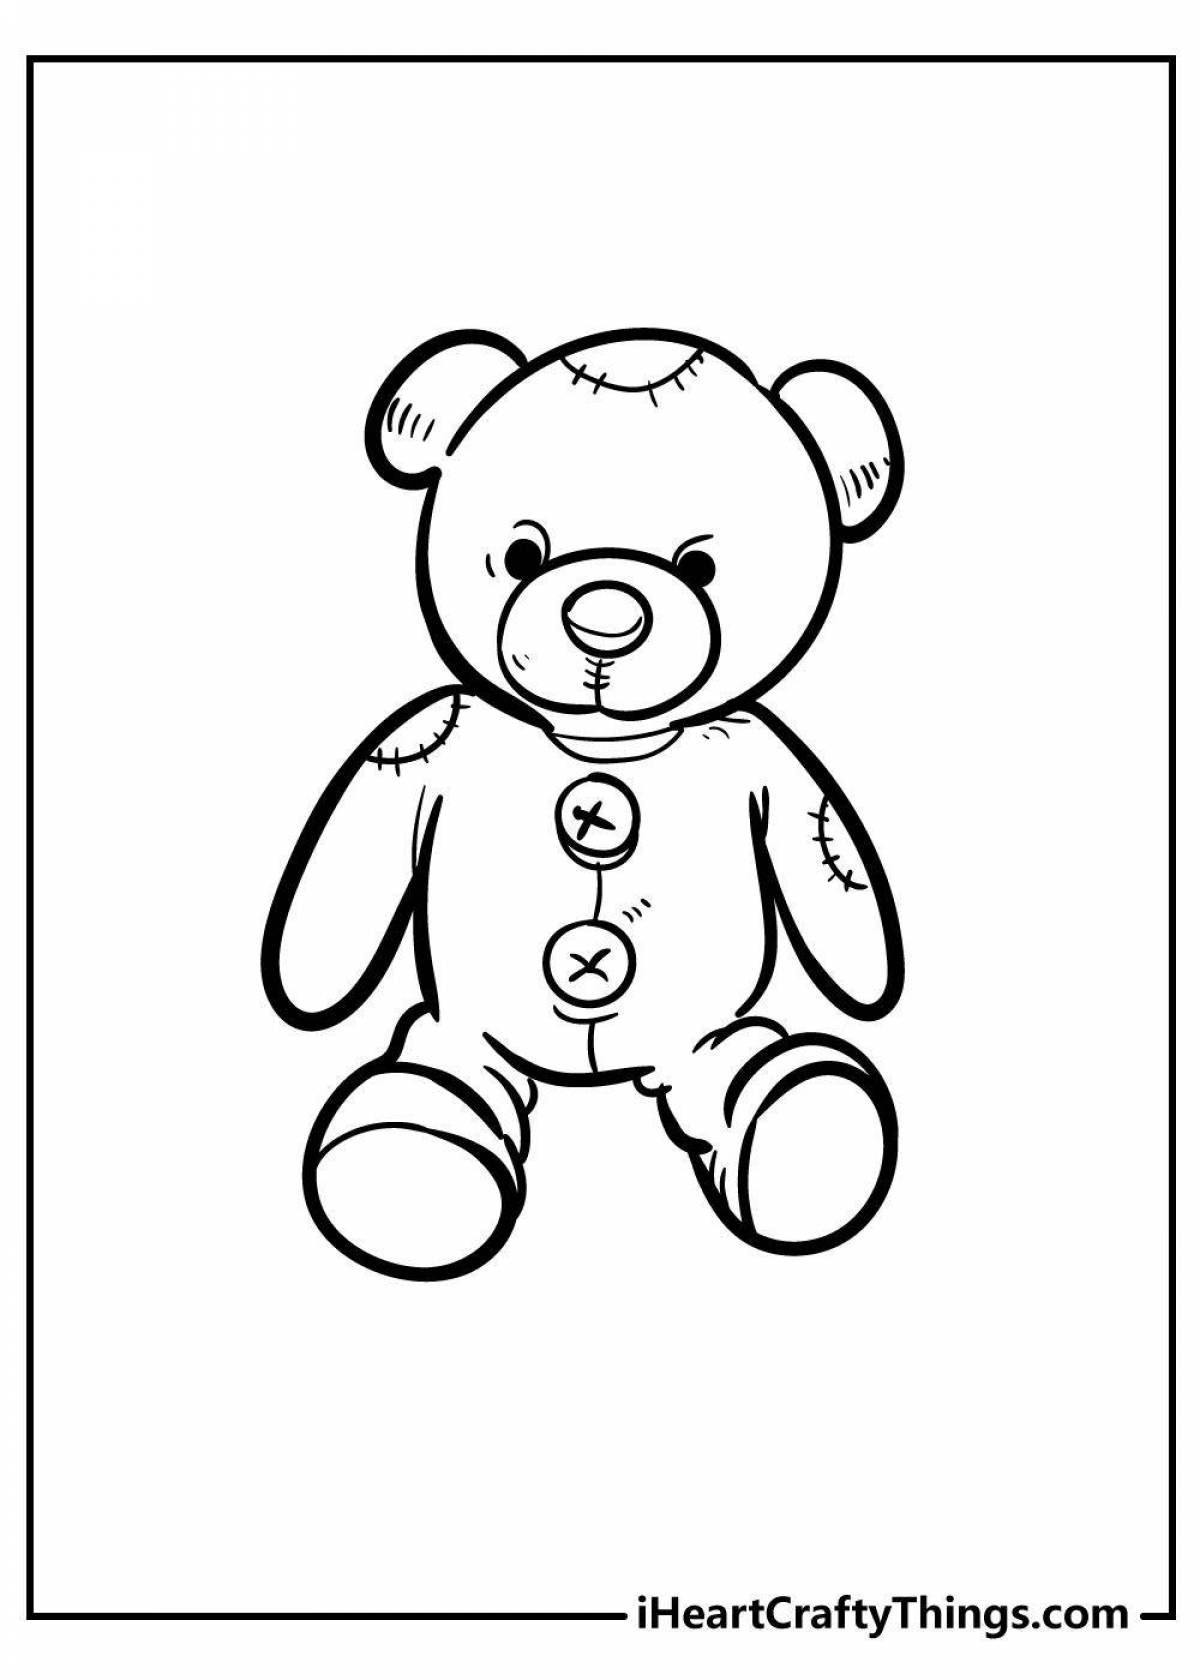 Snuggly coloring page clumsy bear